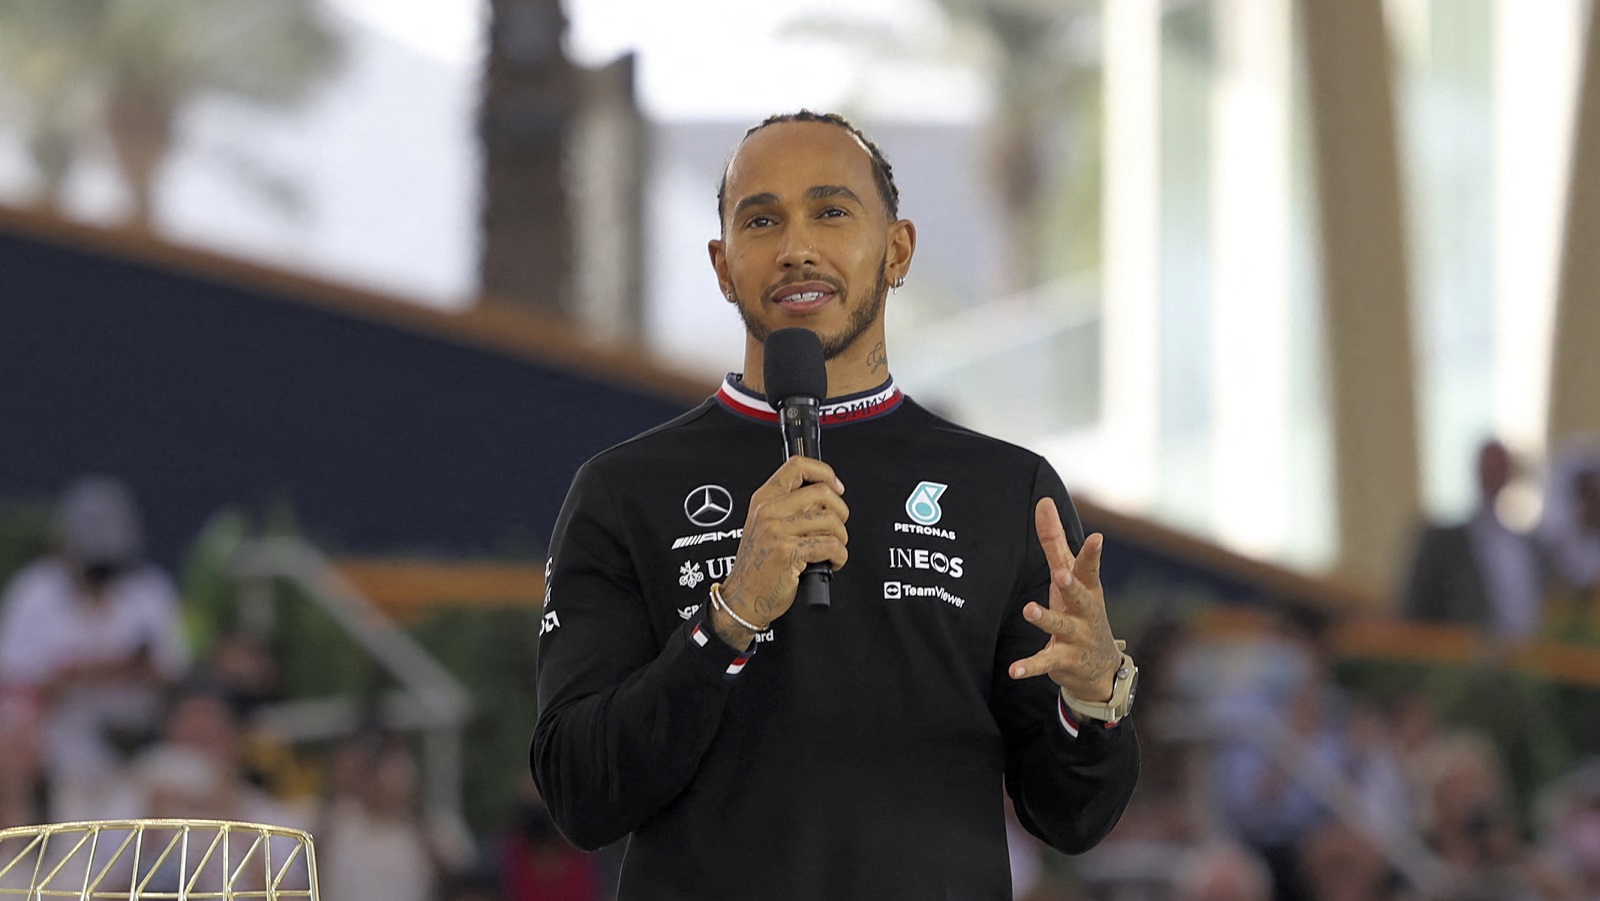 Lewis Hamilton speaks at Expo Dubai 2020 in the Gulf emirate on March 14, 2022.